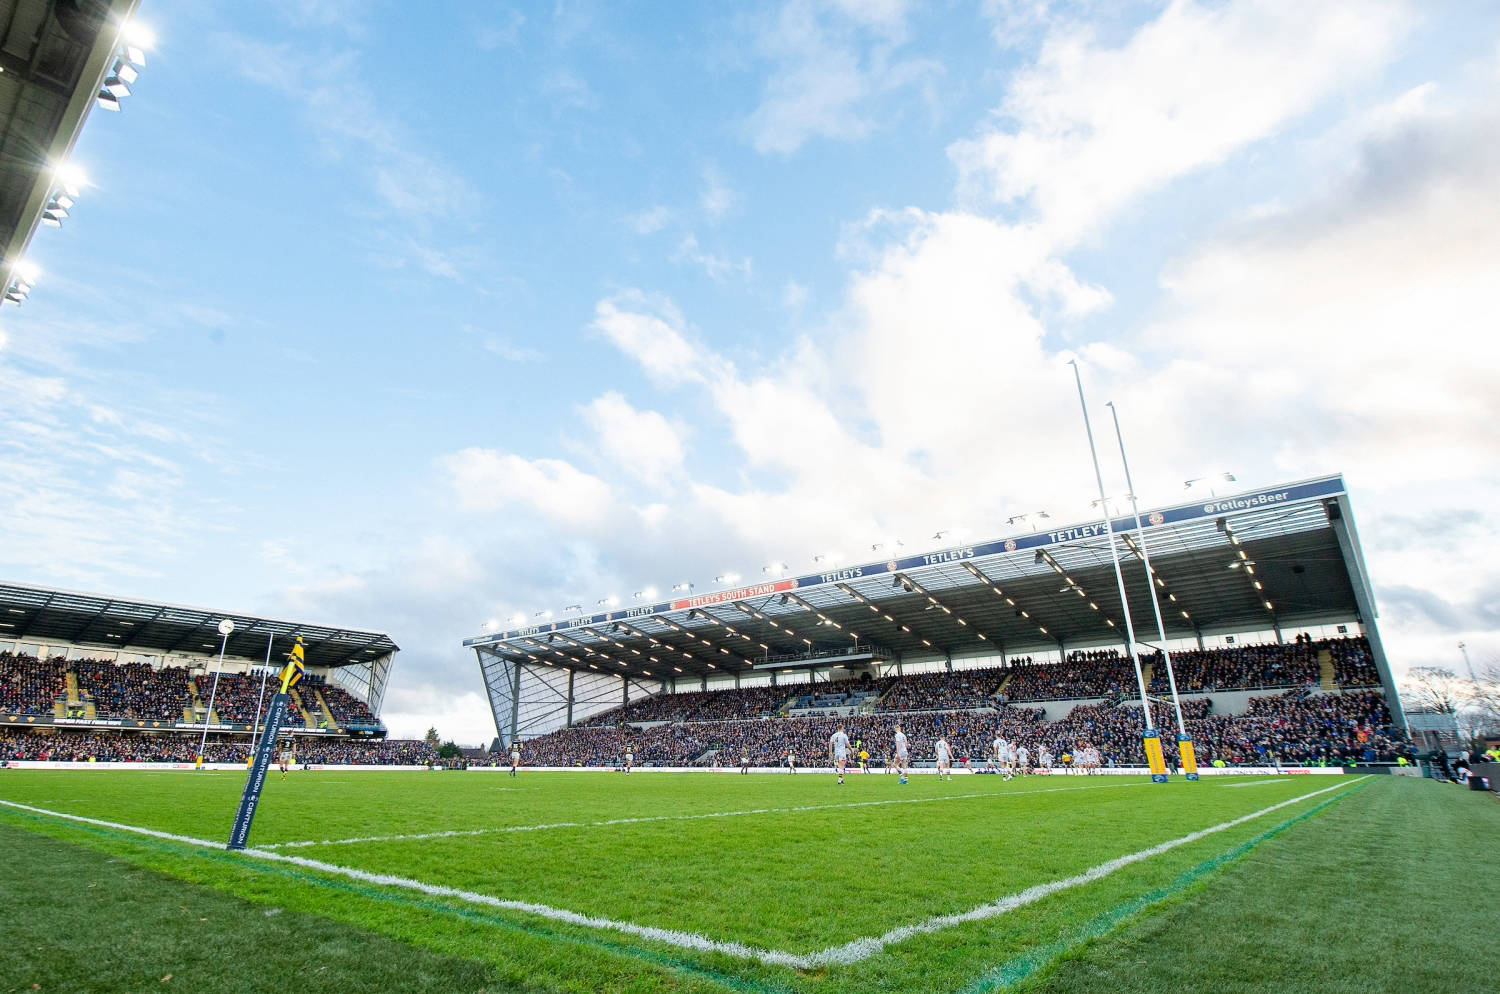 RFL and Super League joint statement on season suspension